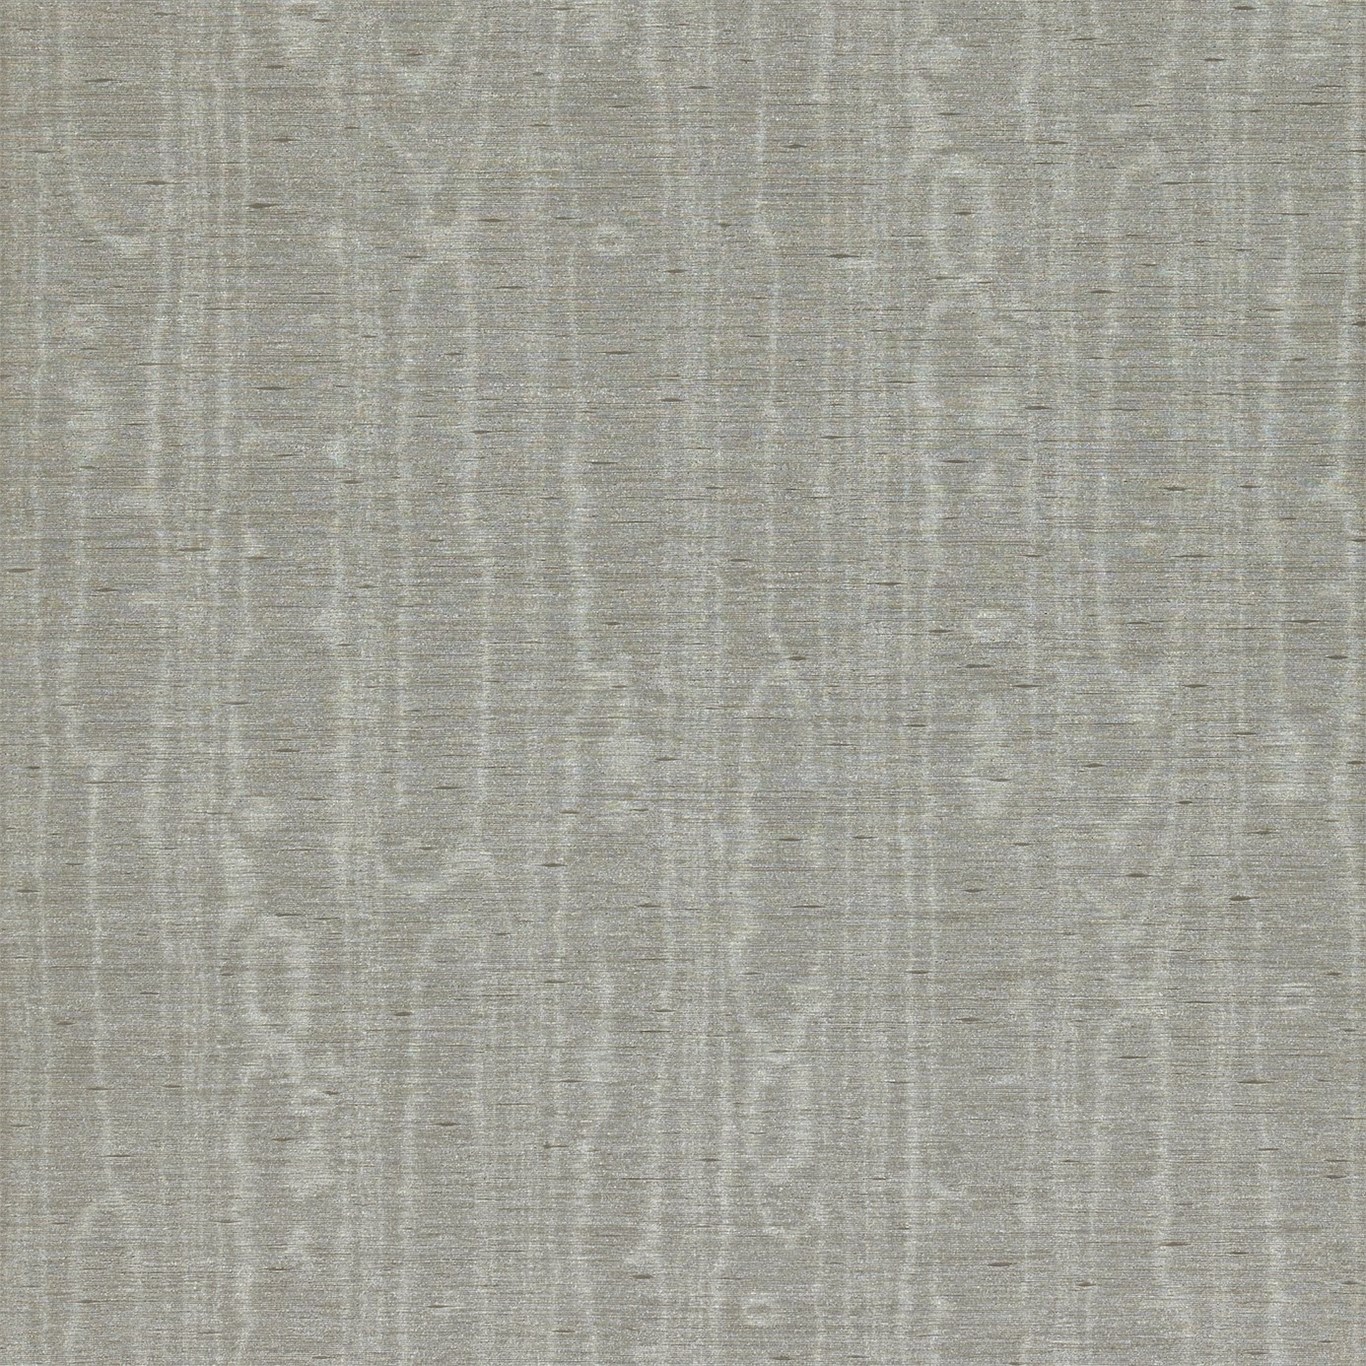 sparkle wallpaper,pattern,wallpaper,brown,beige,wrapping paper